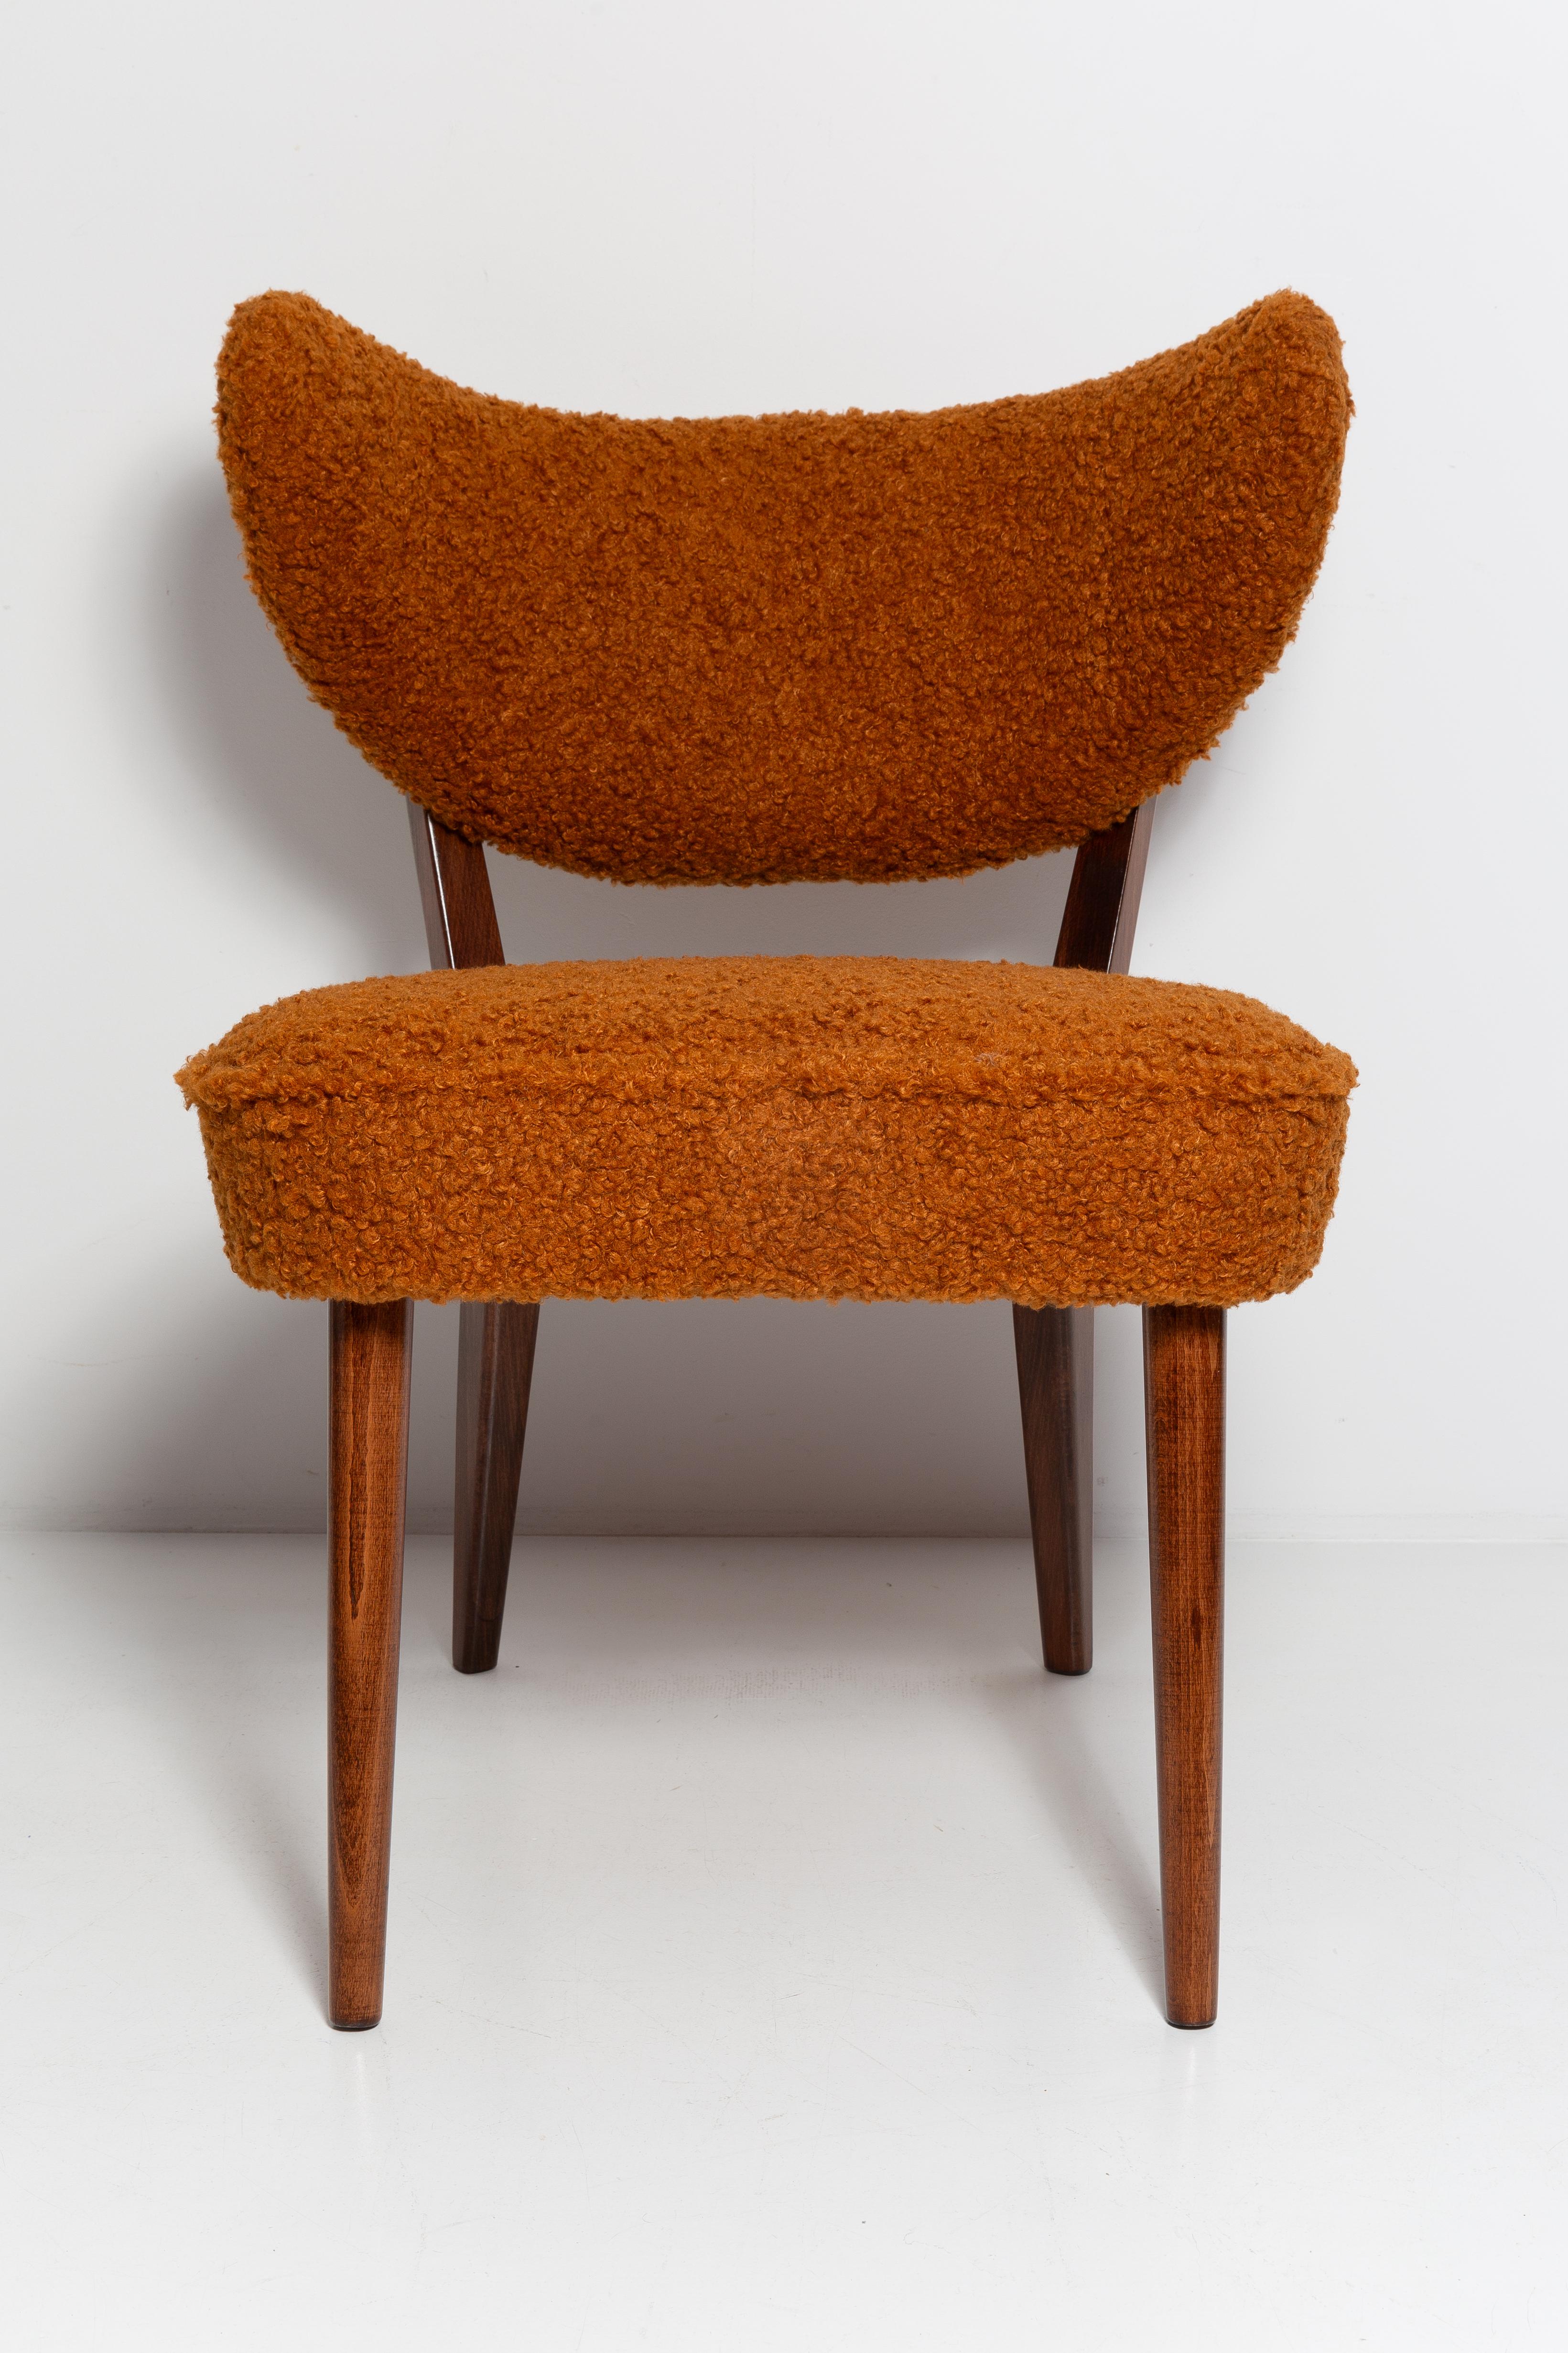 Bouclé Pair of Orange Boucle Shell Club Chairs, by Vintola Studio, Europe, Poland For Sale